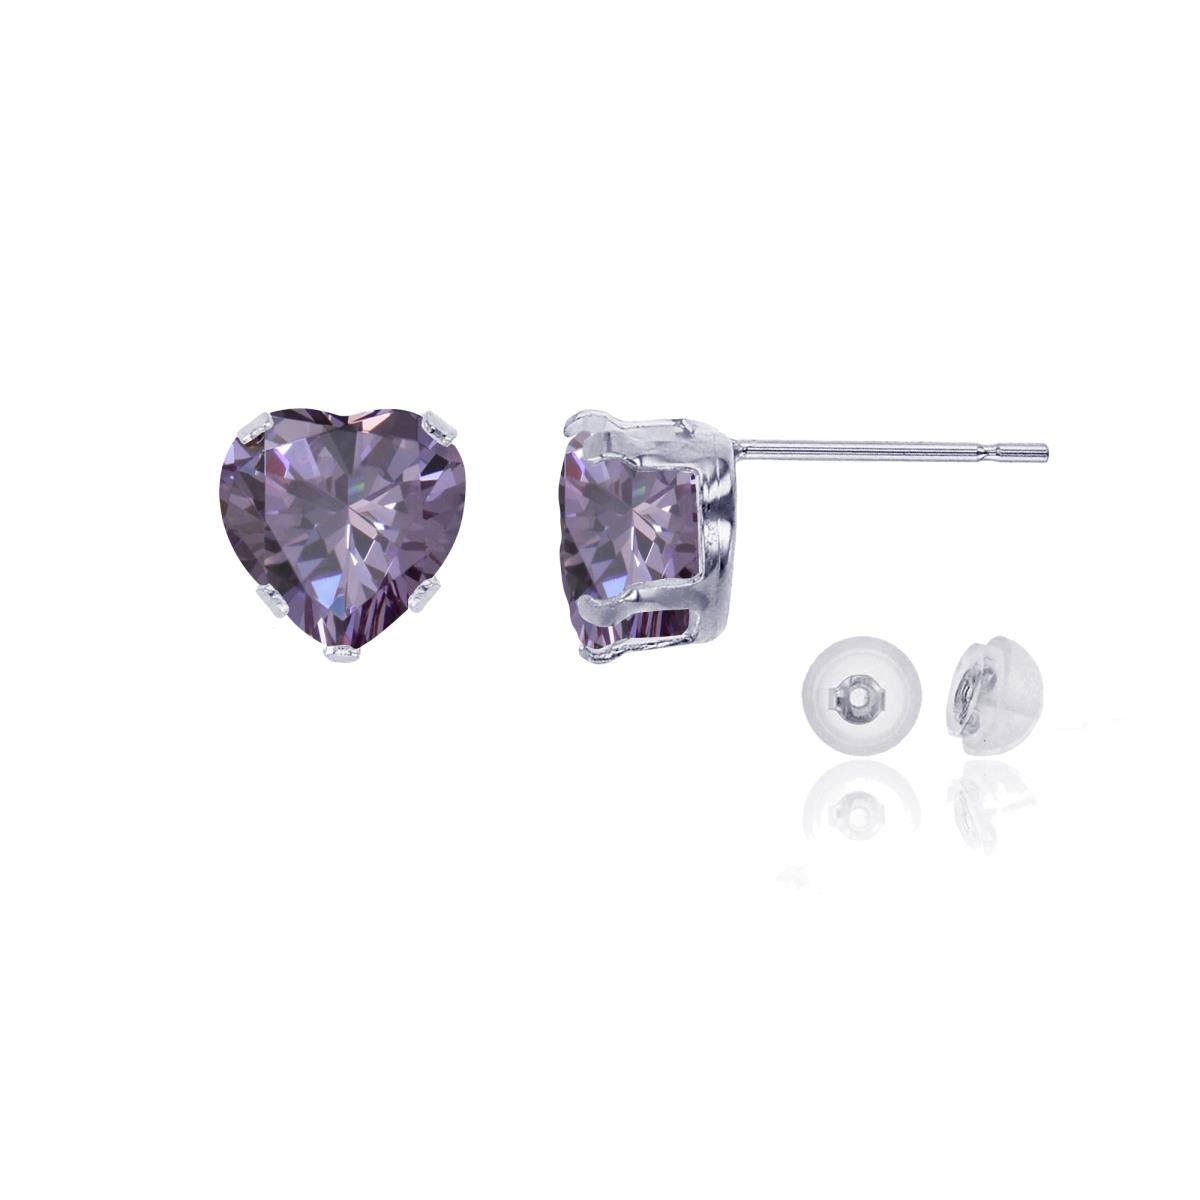 14K White Gold 5x5mm Heart Amethyst Stud Earring with Silicone Back